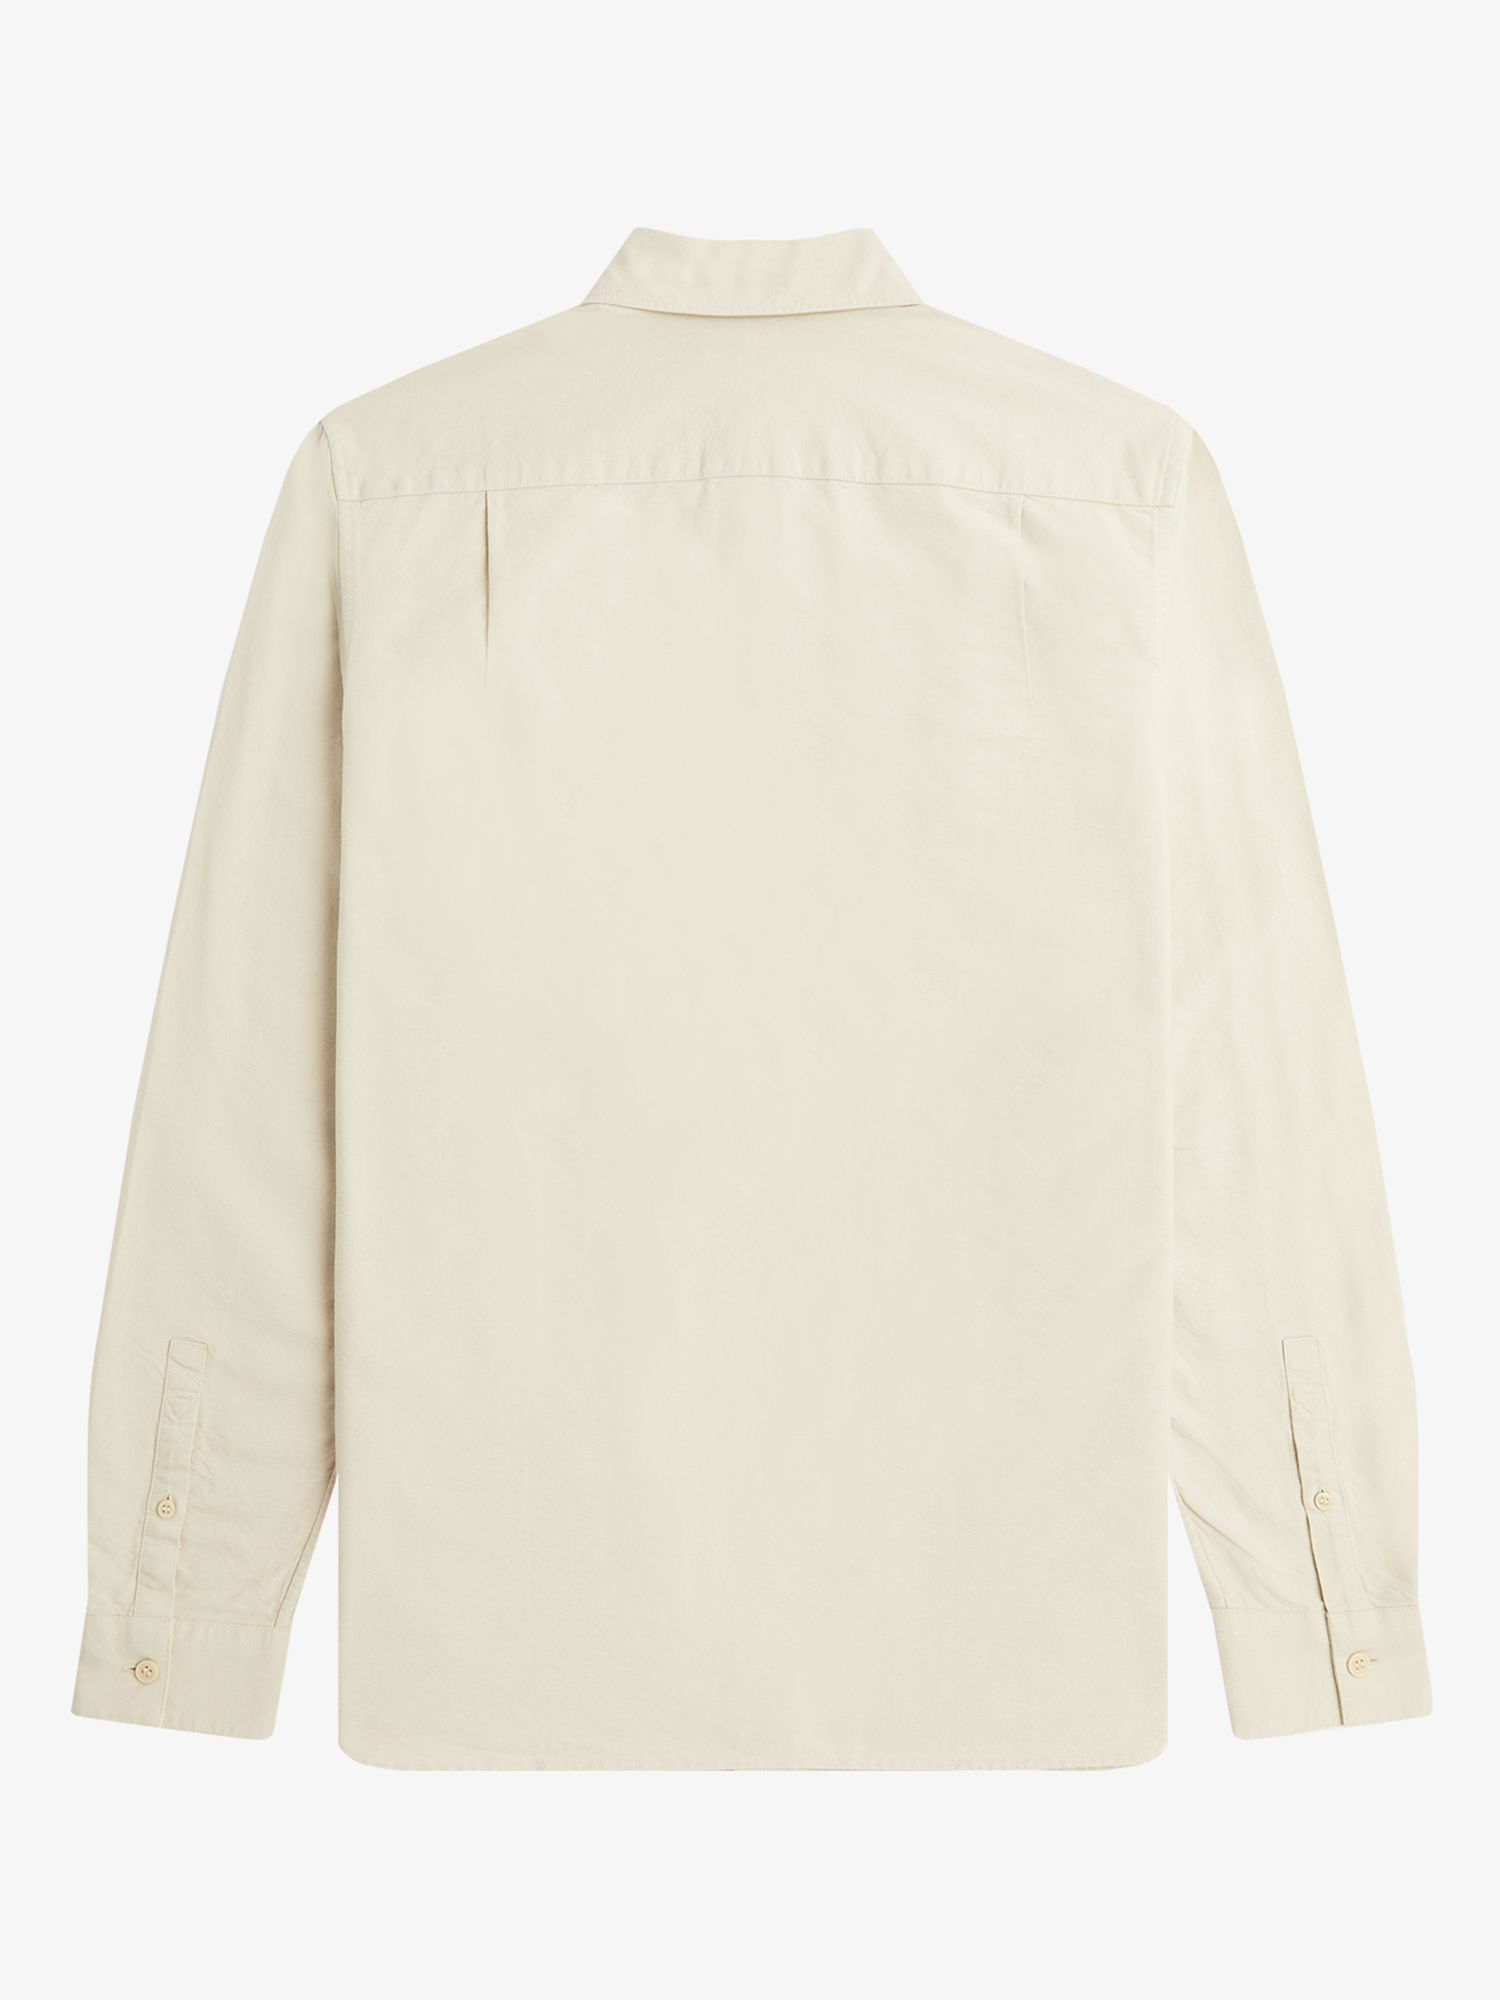 Fred Perry Oxford Shirt, Oatmeal, XXL